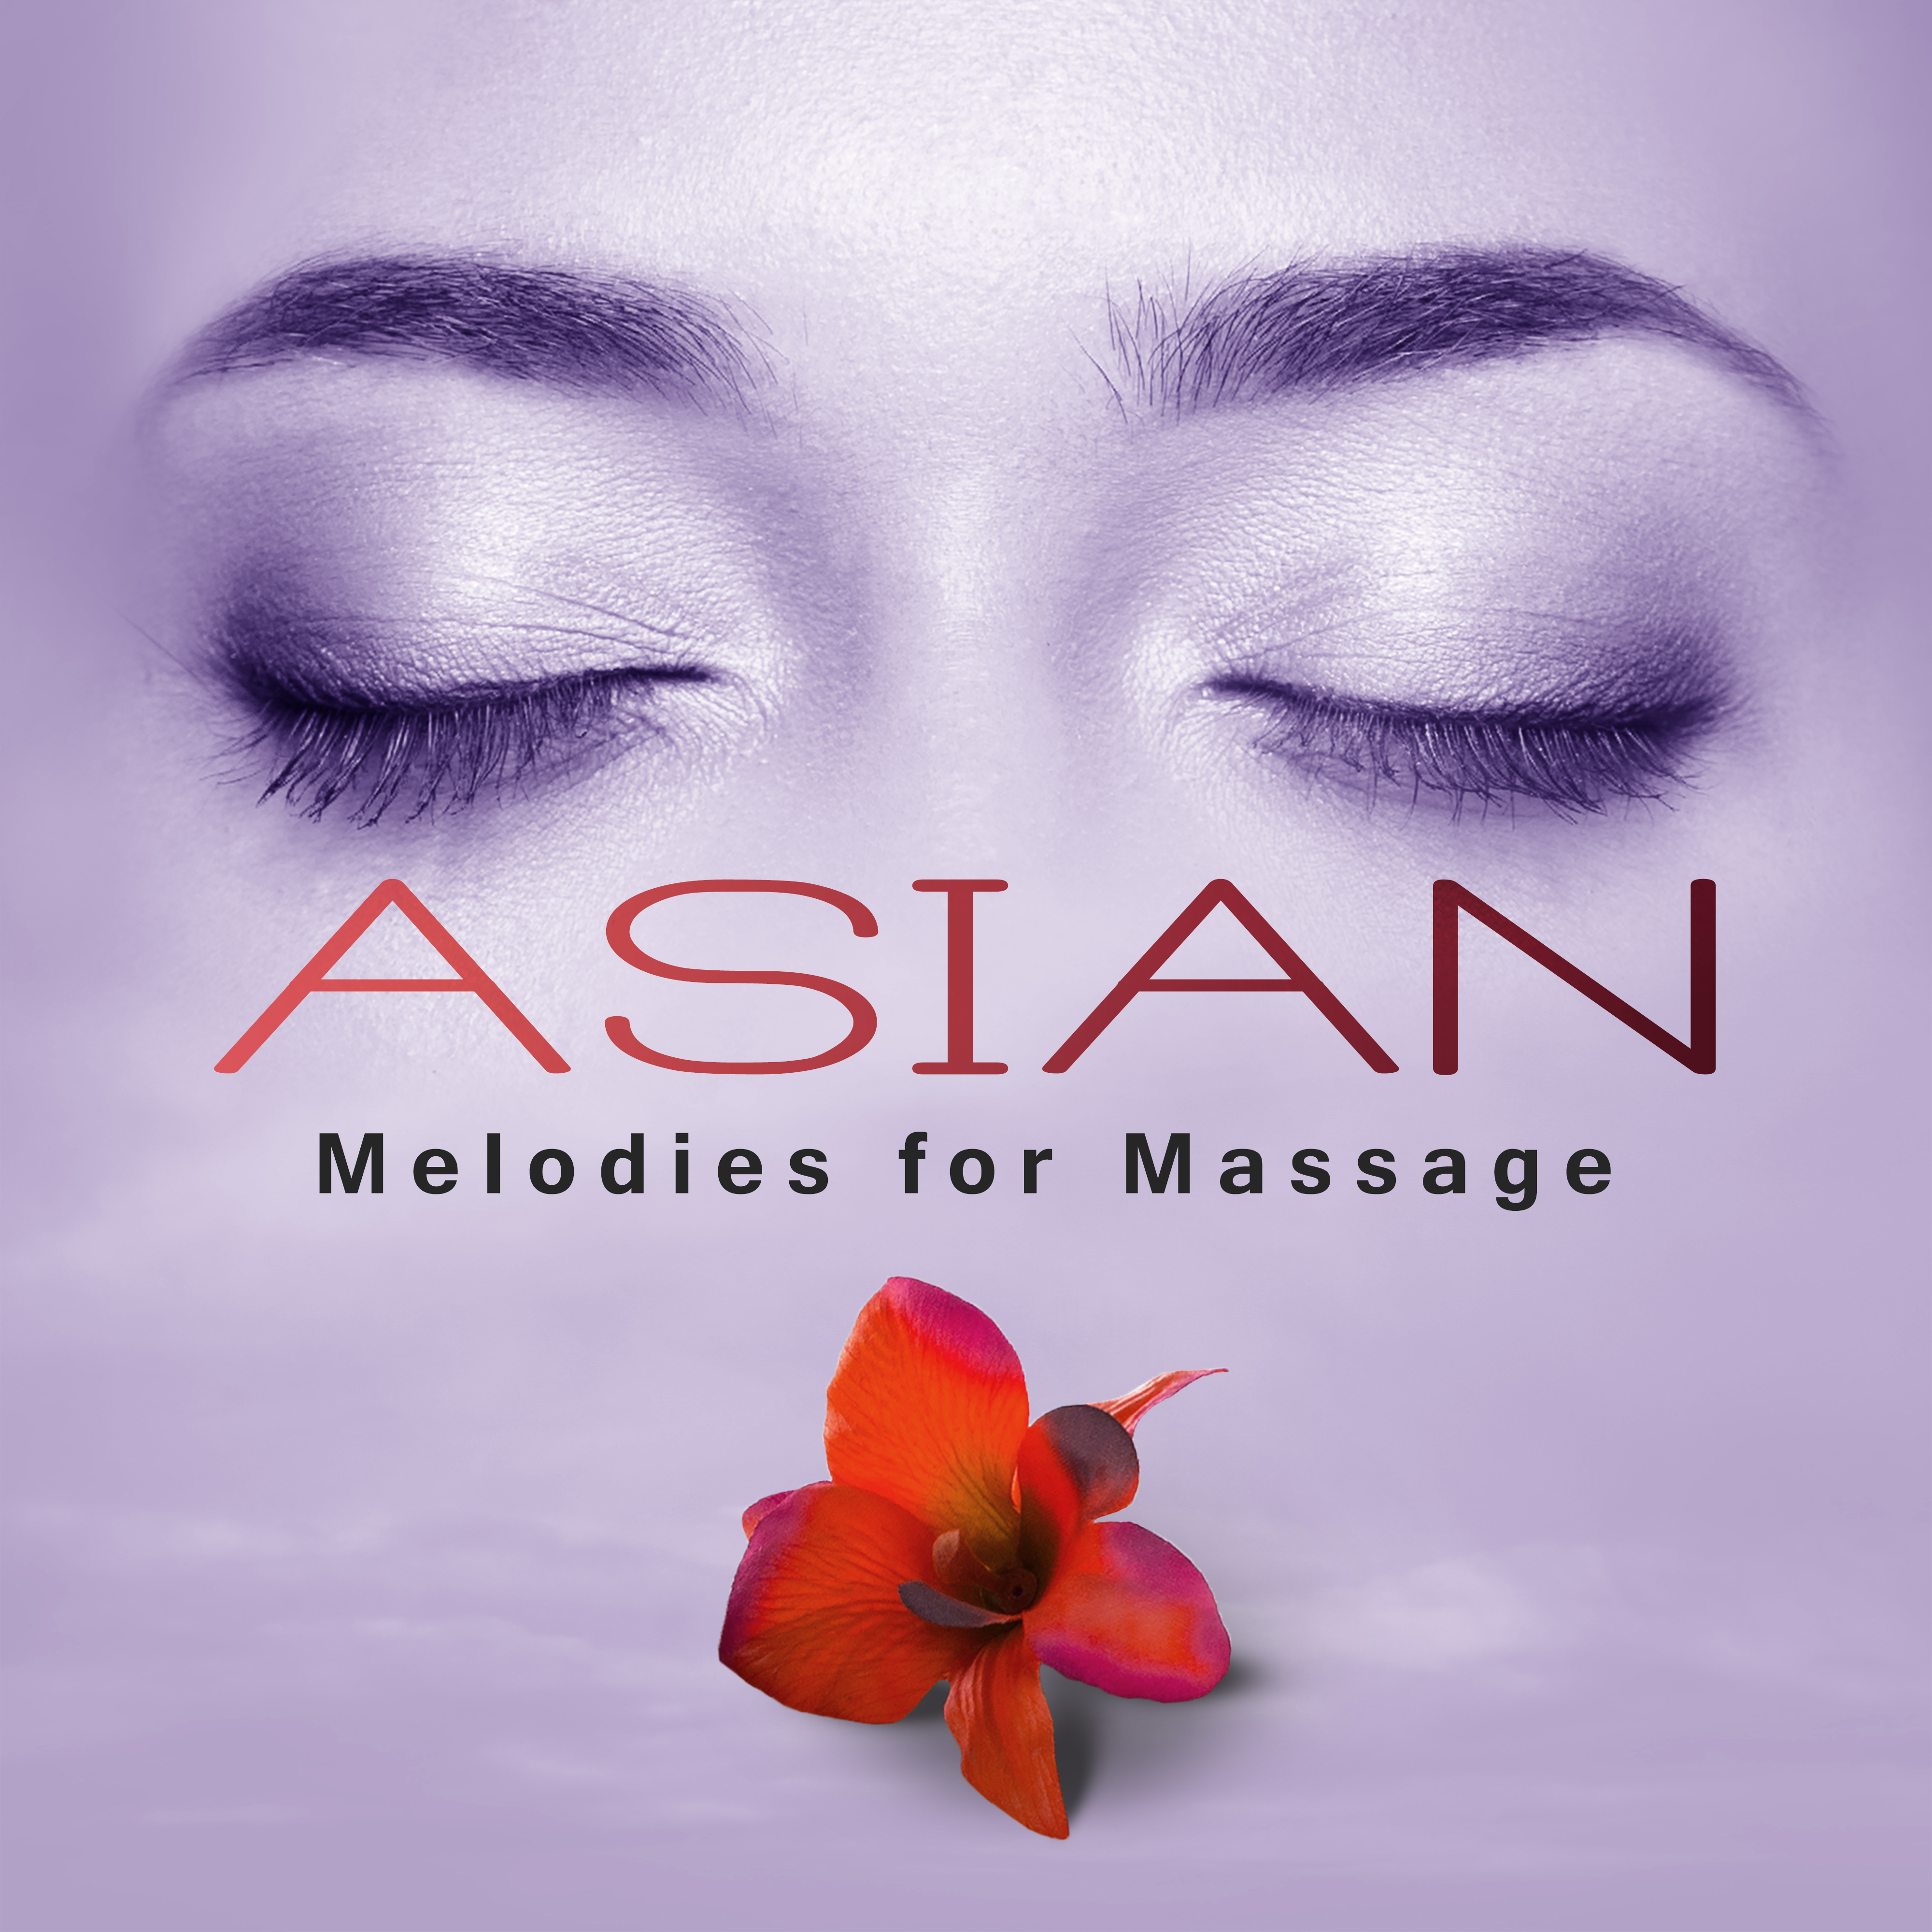 Asian Melodies for Massage – Therapy Music for Massage, Spa, Wellness Hotel, Deep Relaxation with Calming Nature Sounds